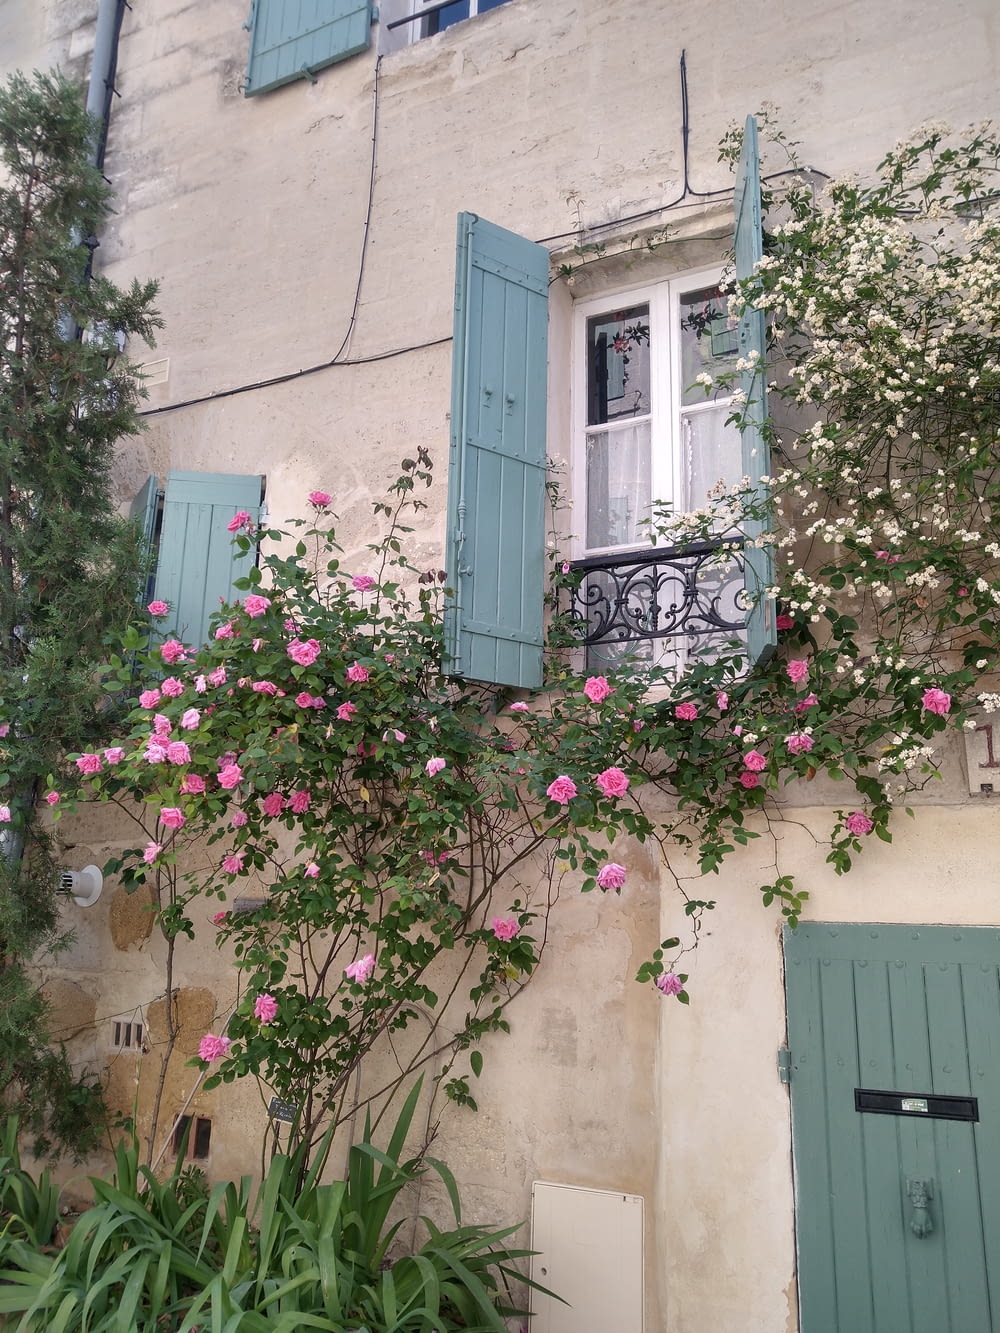 a house with green shutters and pink flowers on the windows